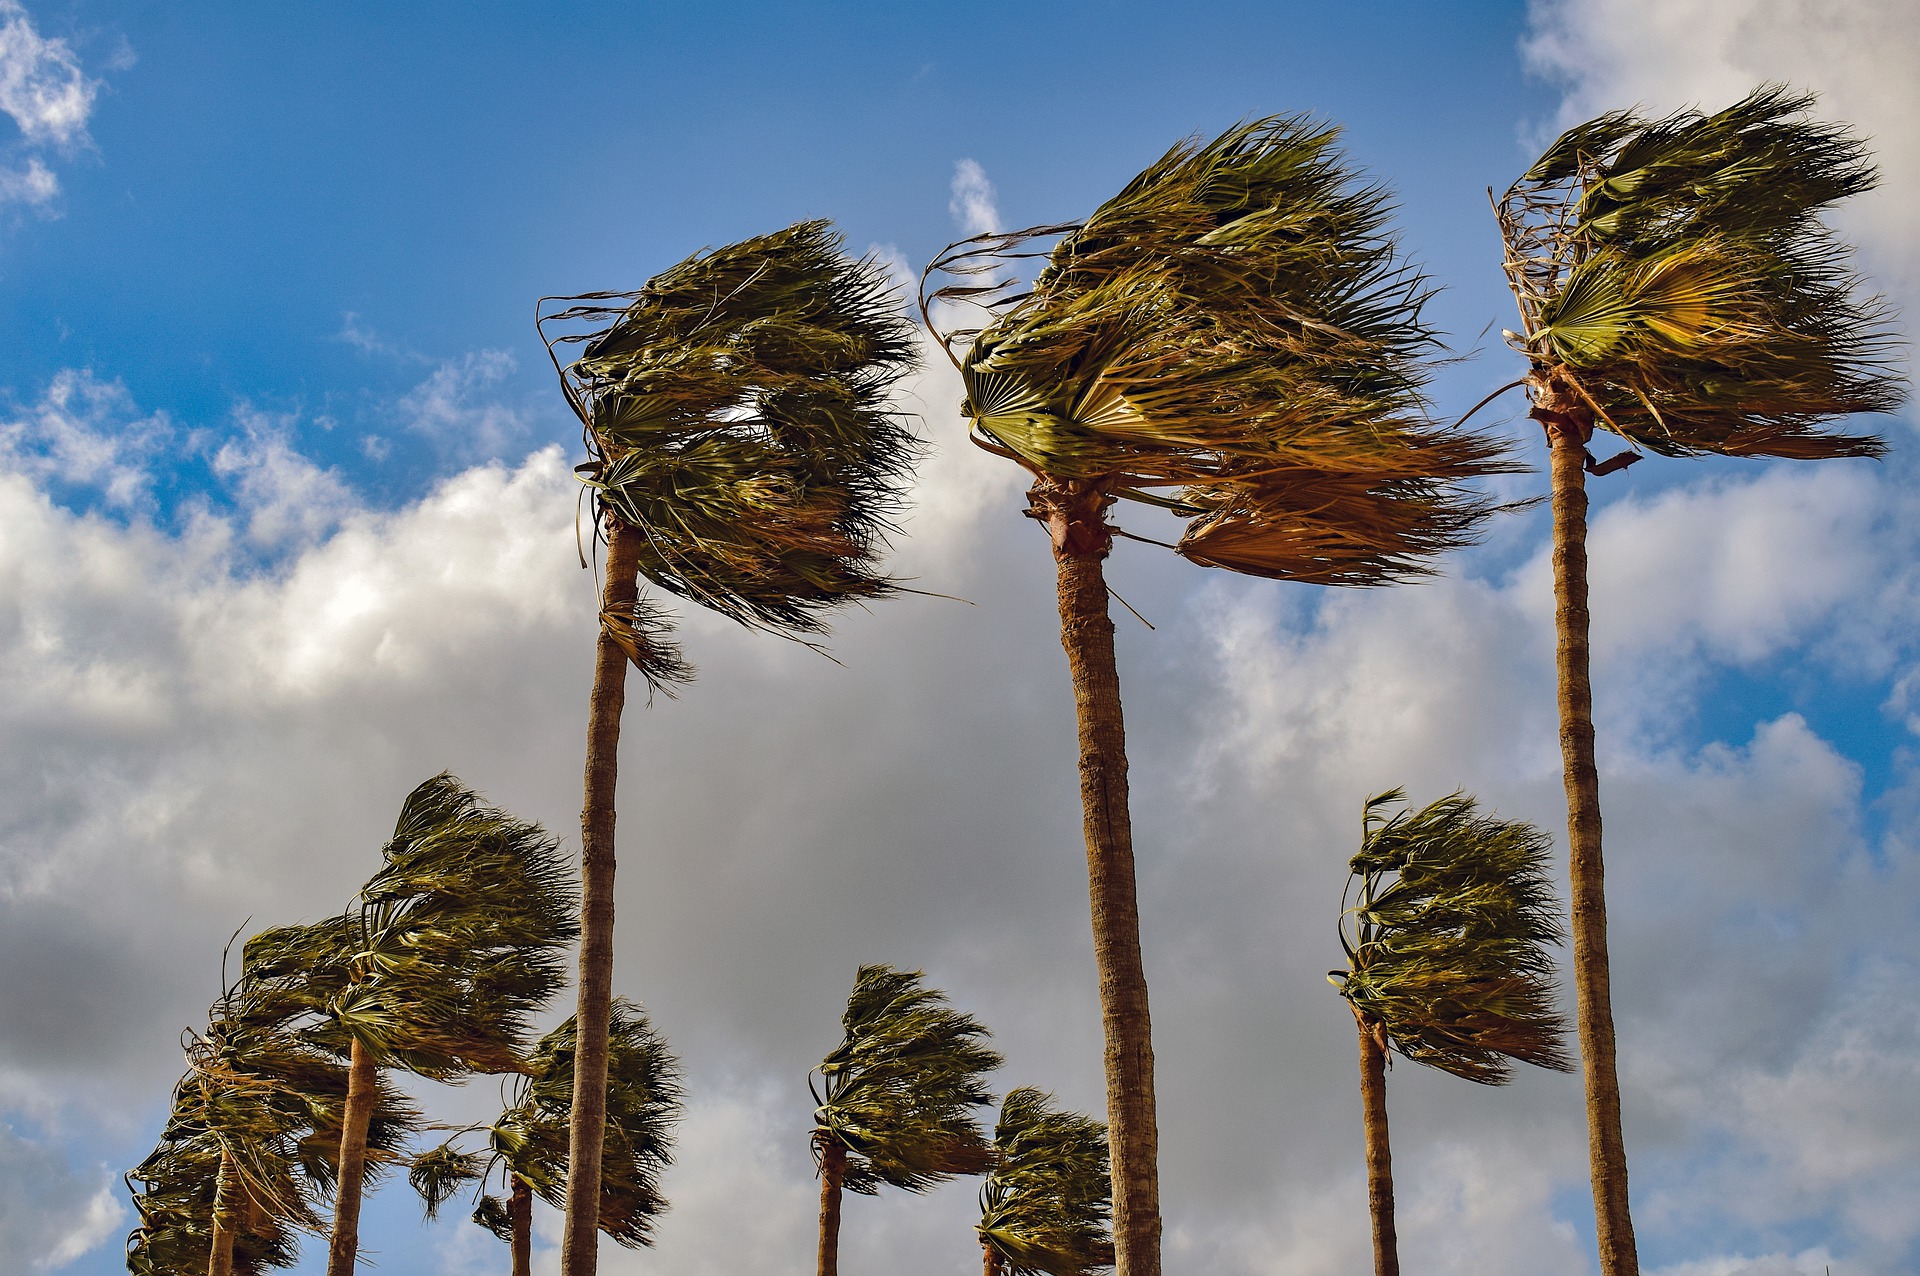 Weather alert activated for strong winds in Spain’s Malaga—specifically Axarquia
– News X